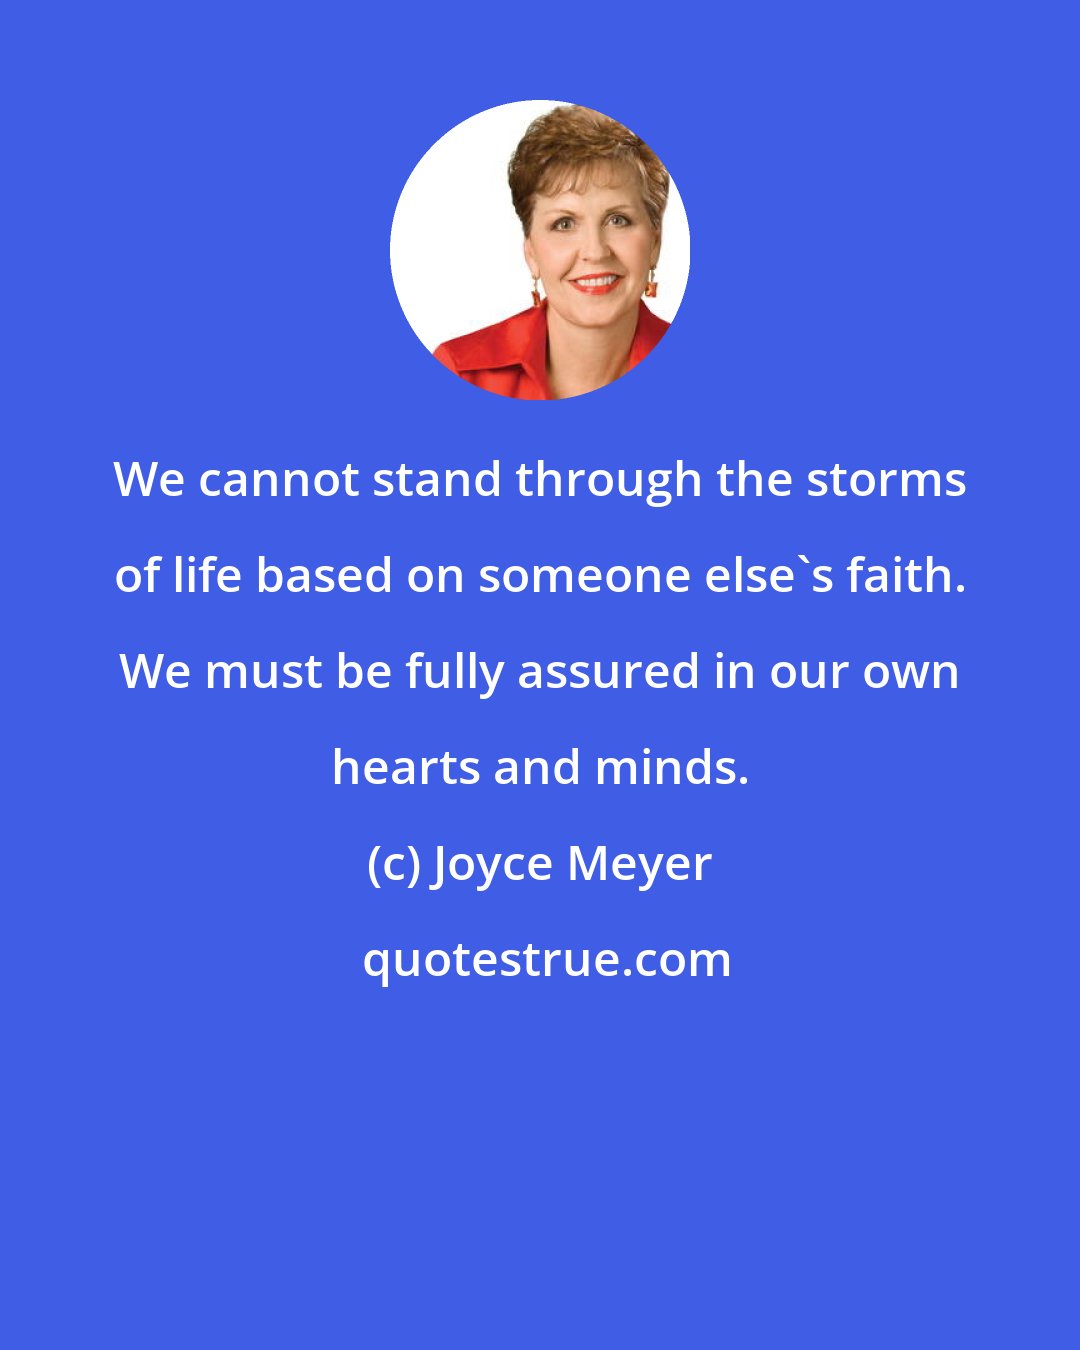 Joyce Meyer: We cannot stand through the storms of life based on someone else's faith. We must be fully assured in our own hearts and minds.